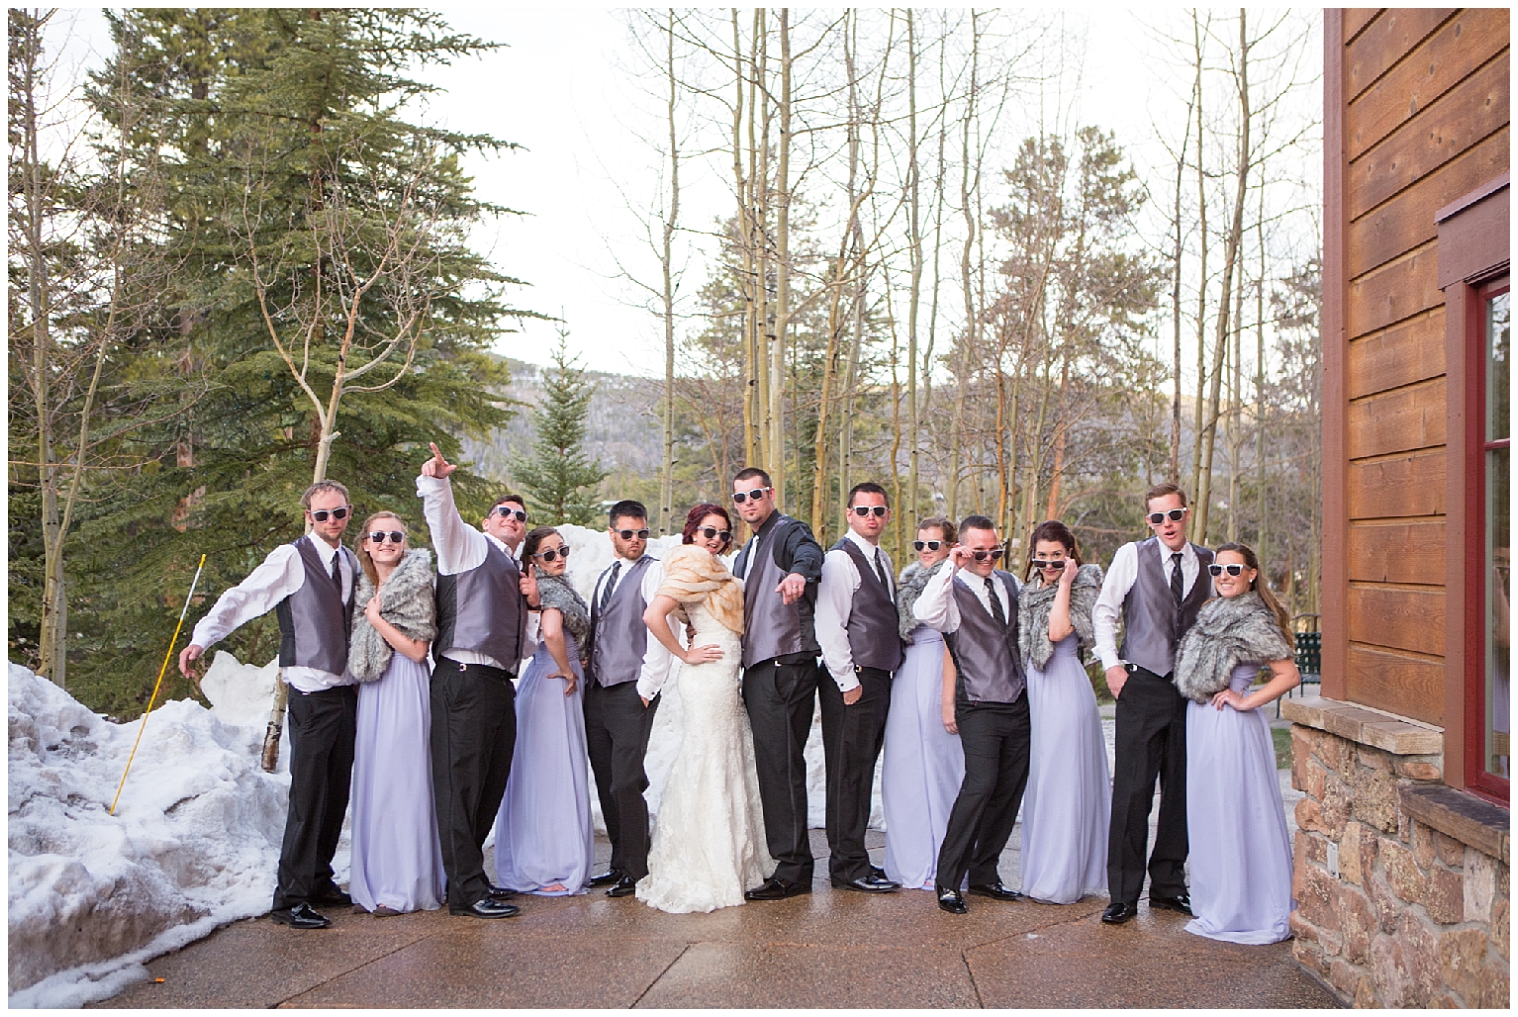 Fun portrait of the bridal party at a Sevens wedding.